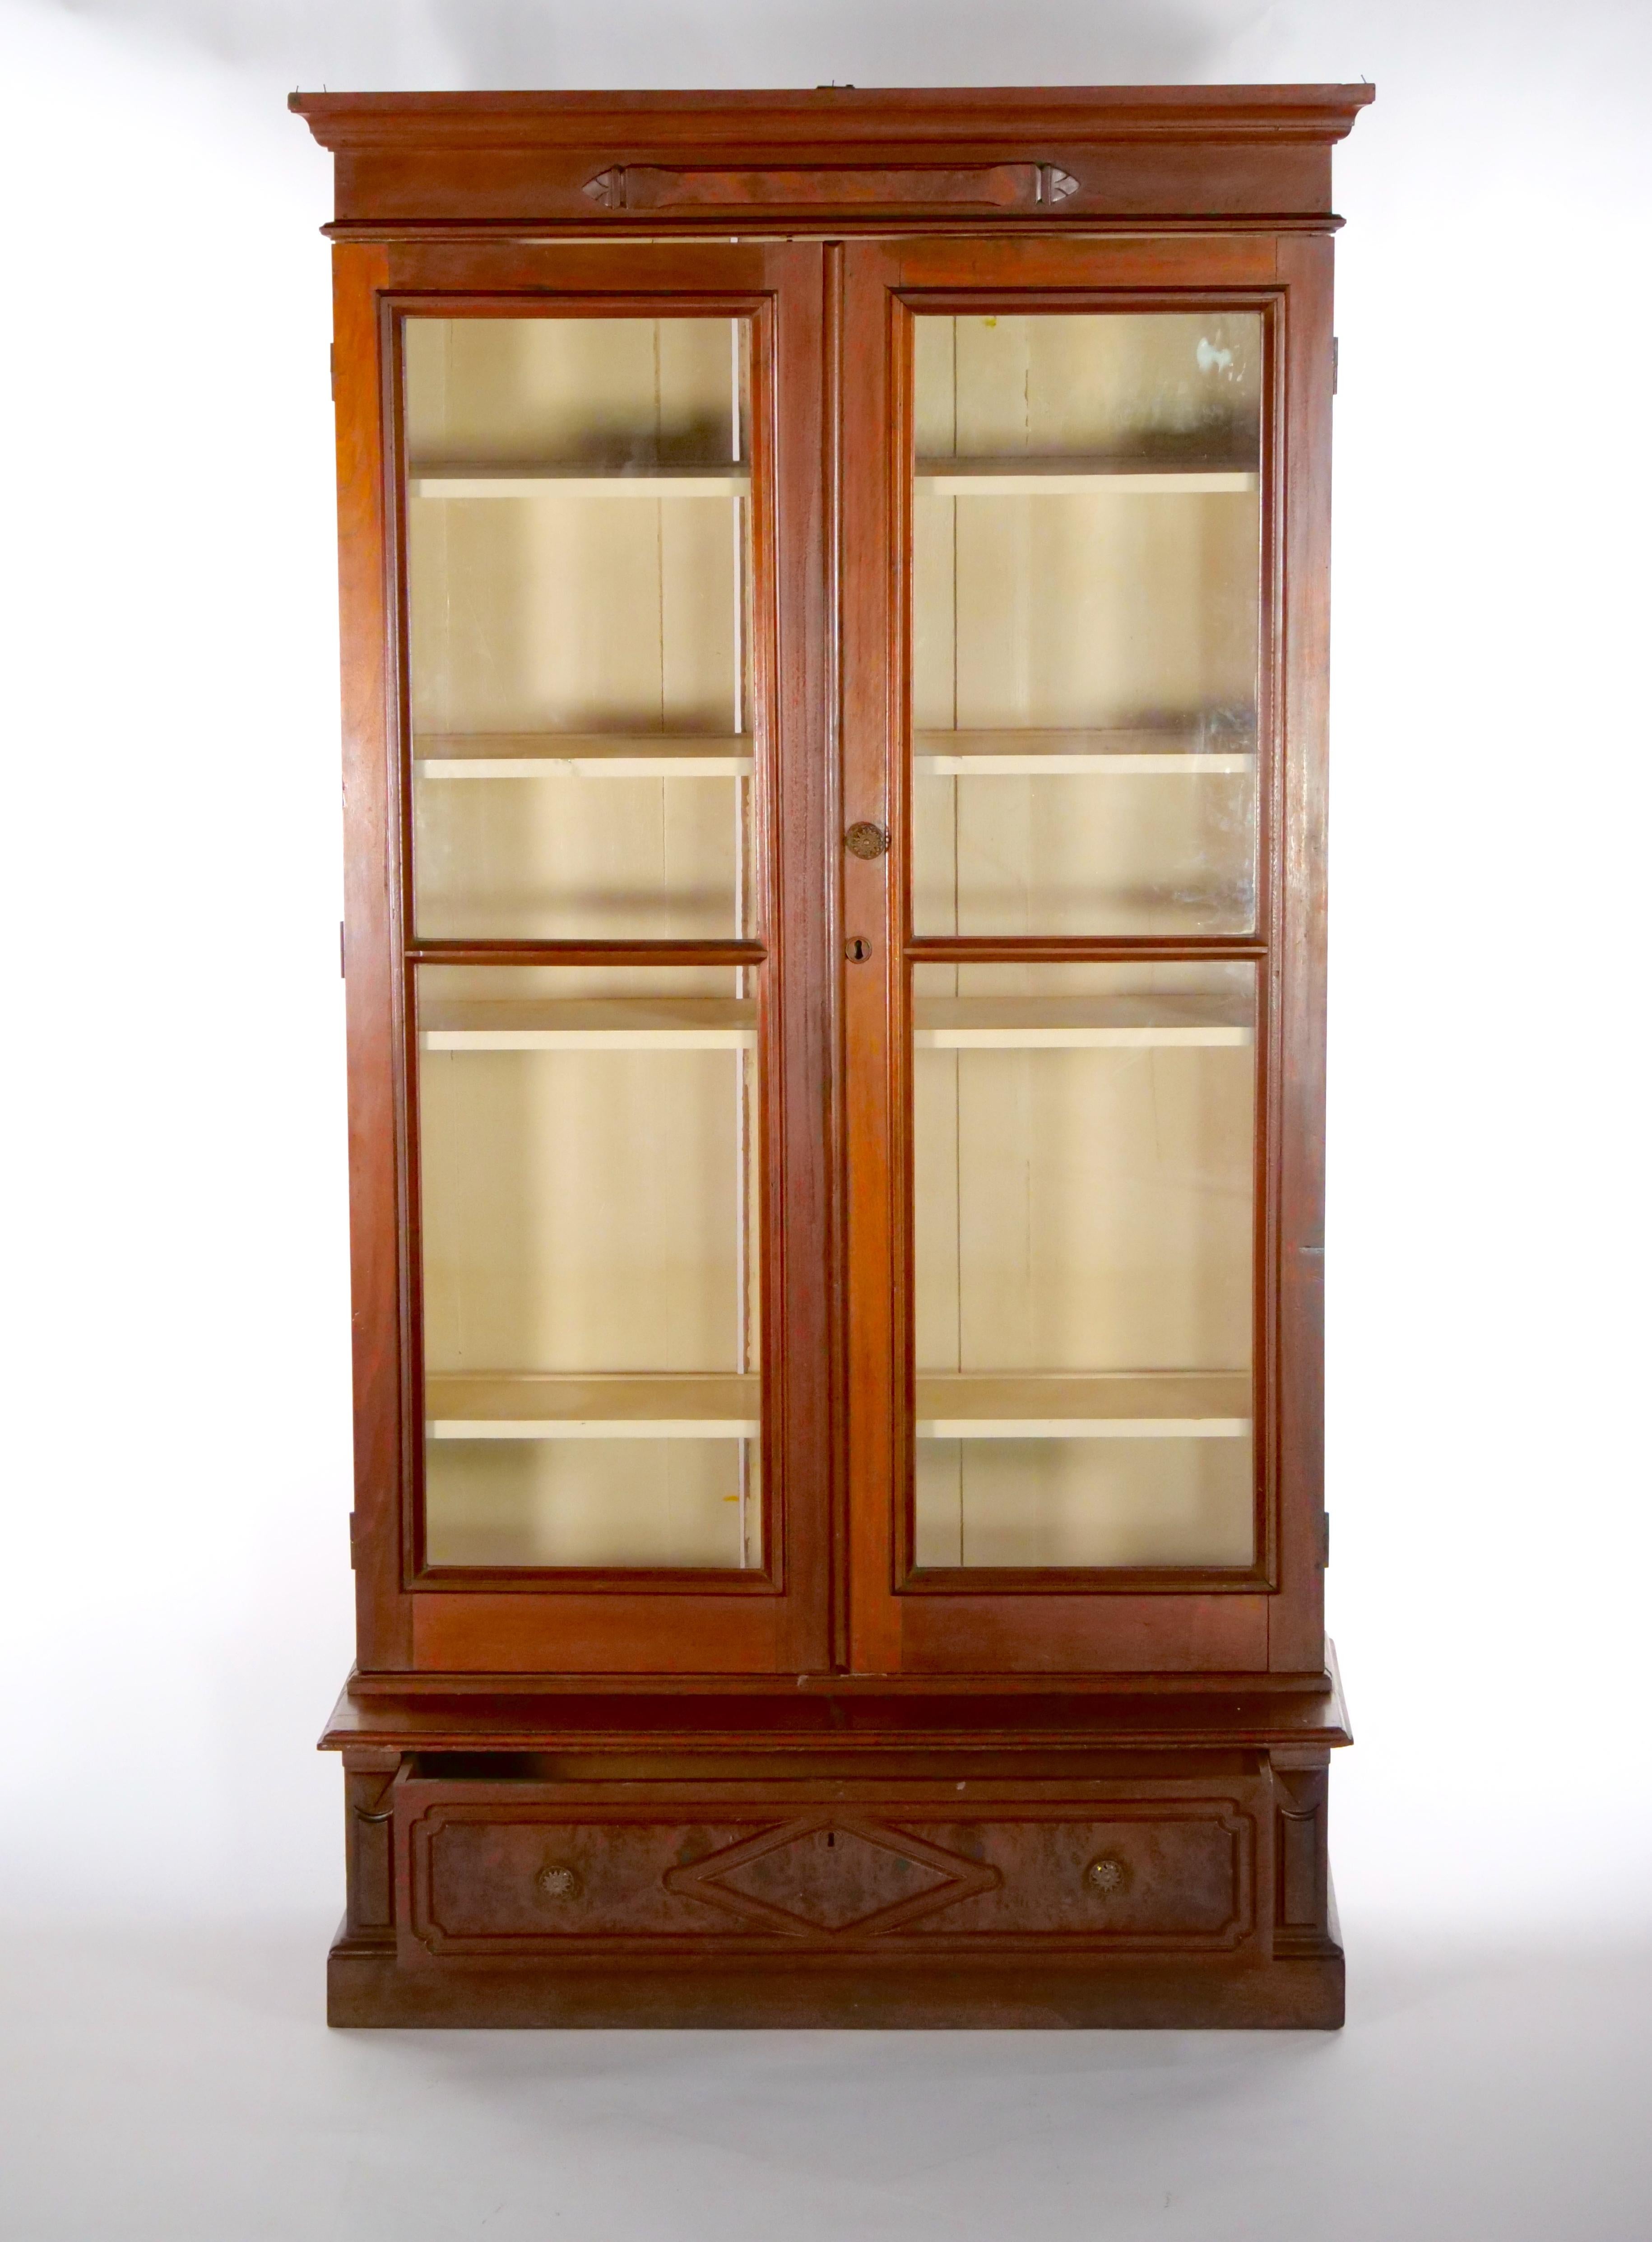 Early 19th century walnut wood Victorian style painted interior two door bookcase / cabinet with bottom front drawer. The bookcase is in good condition. The right door is bowed and not close completely flush. Original finish , breaks down to two